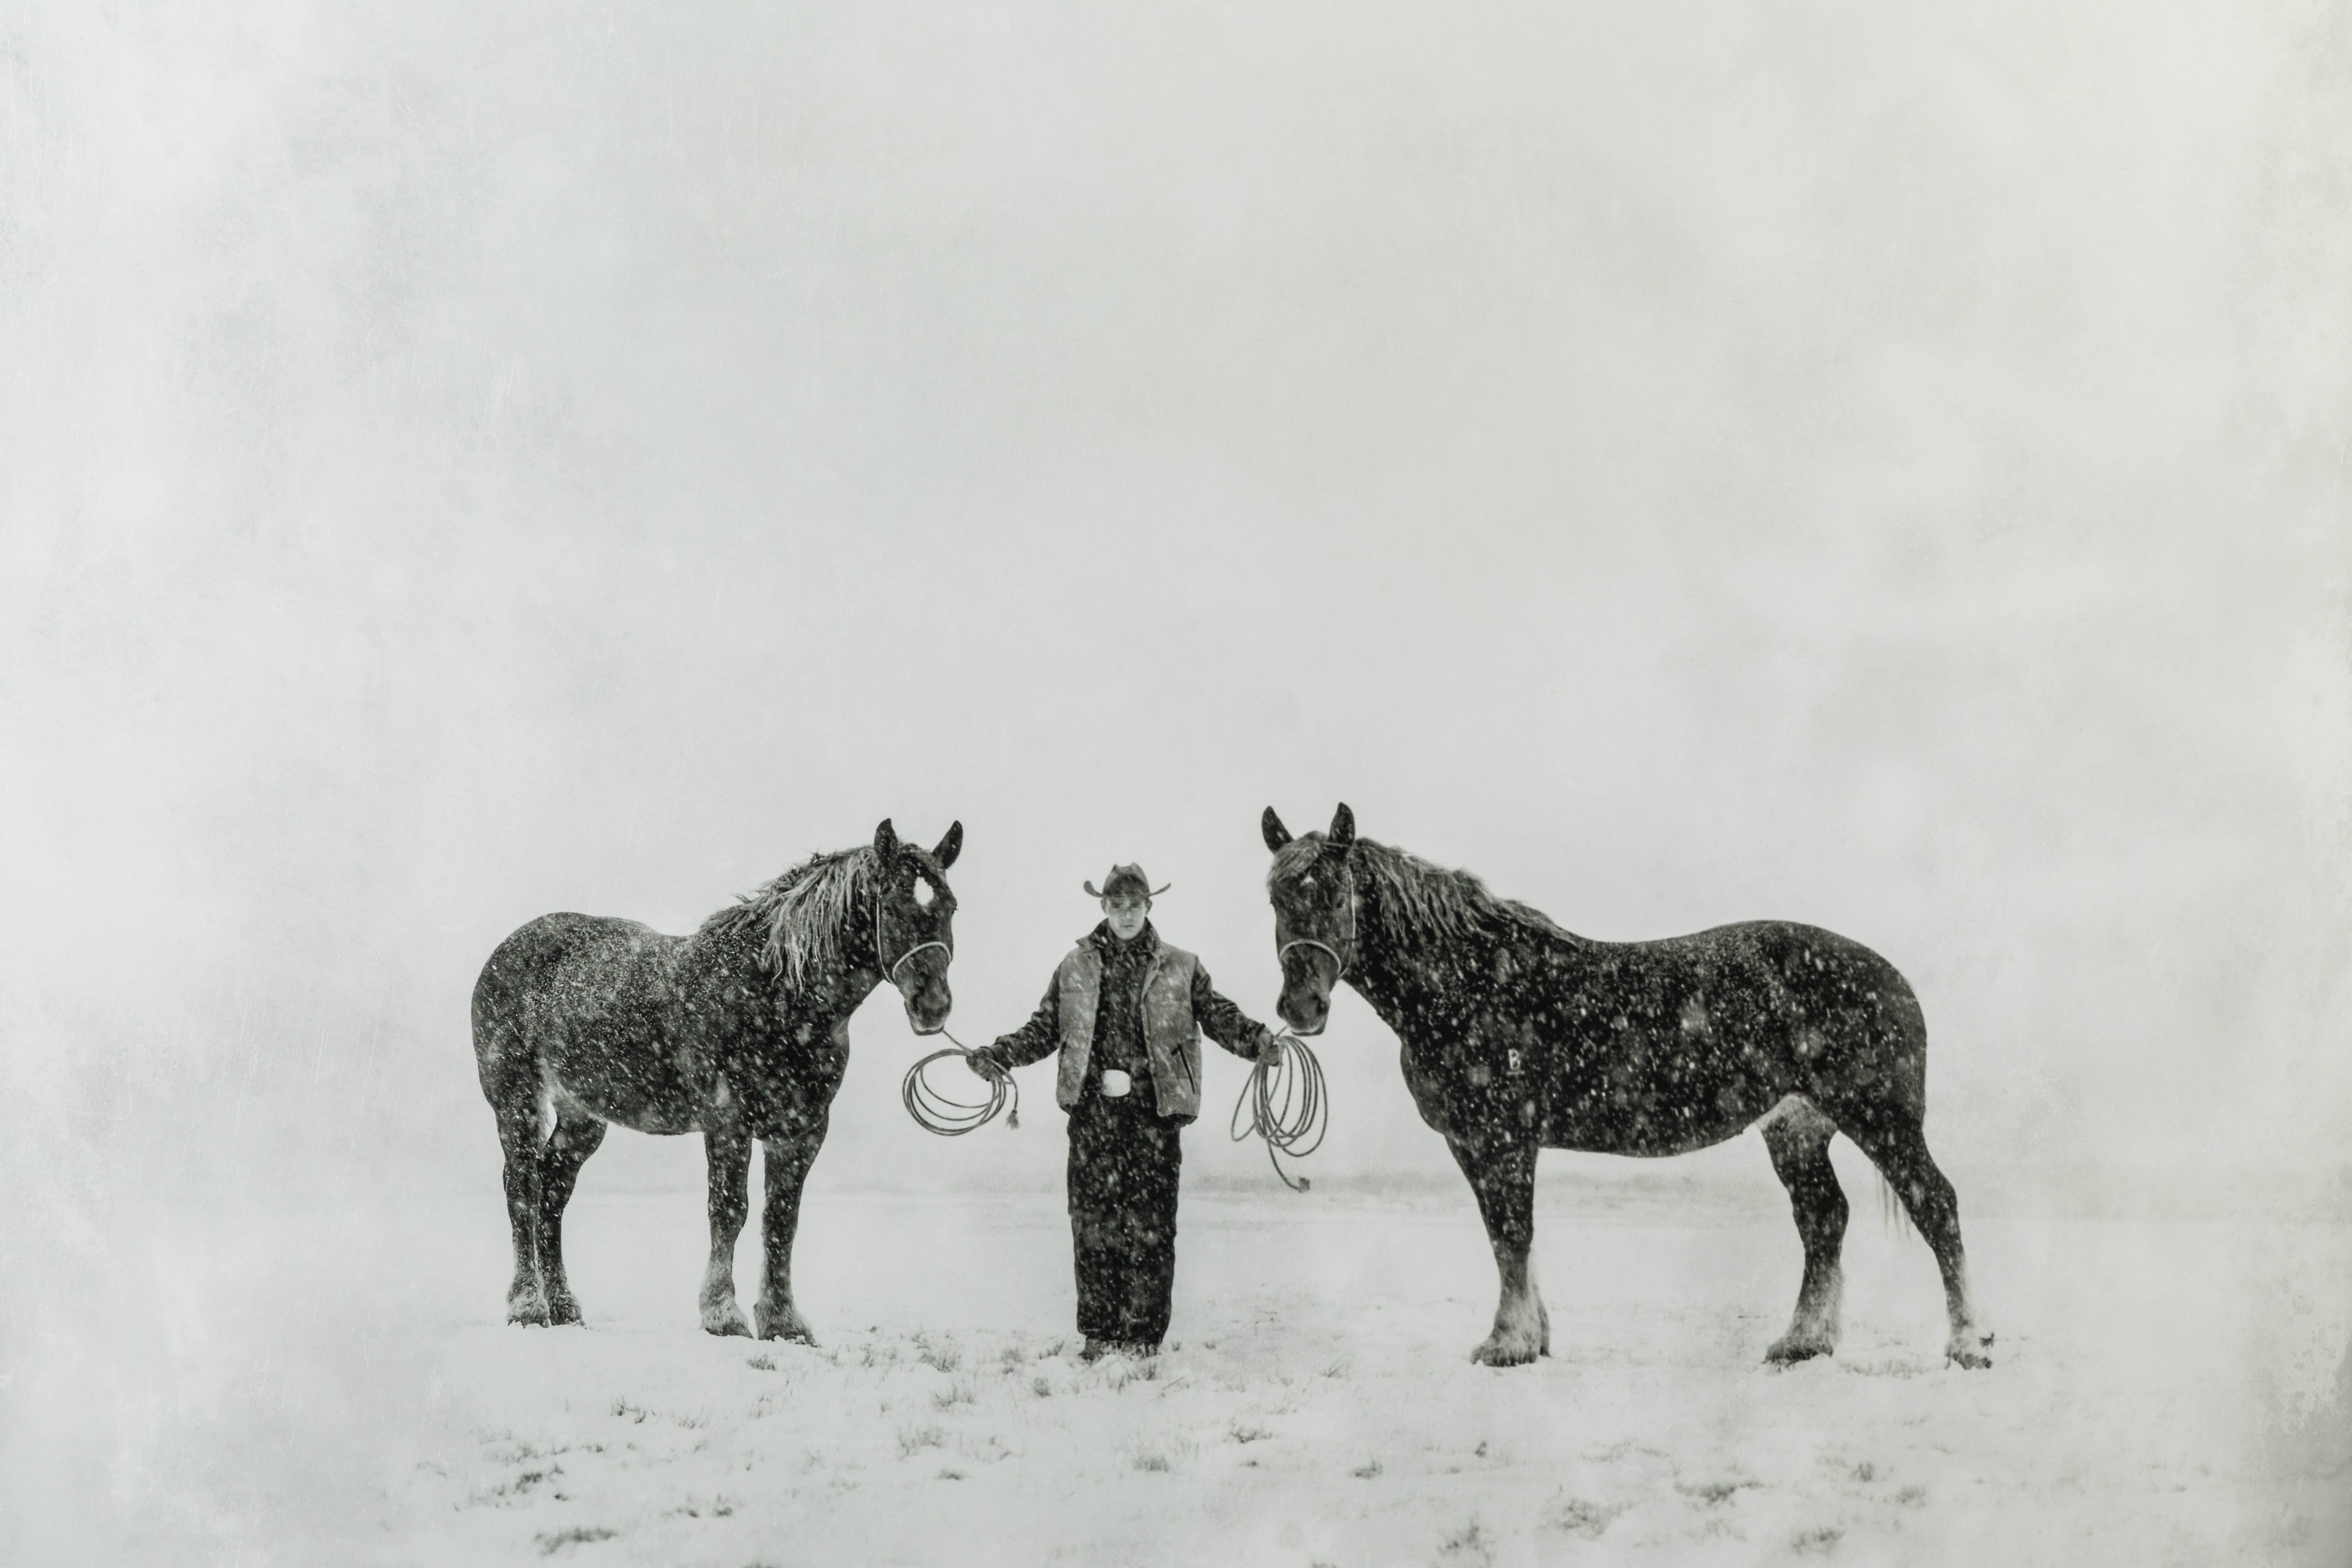 Cowboy and Two Horses Montana, 1999 by Richard Phibbs
Archival Fine Art Pigment Print
52 inches x 42 inches
Edition 2 of 25
Signed and Embossed lower right

Photographer Richard Phibbs brings an artist's eye to every photo he takes—in magazines,